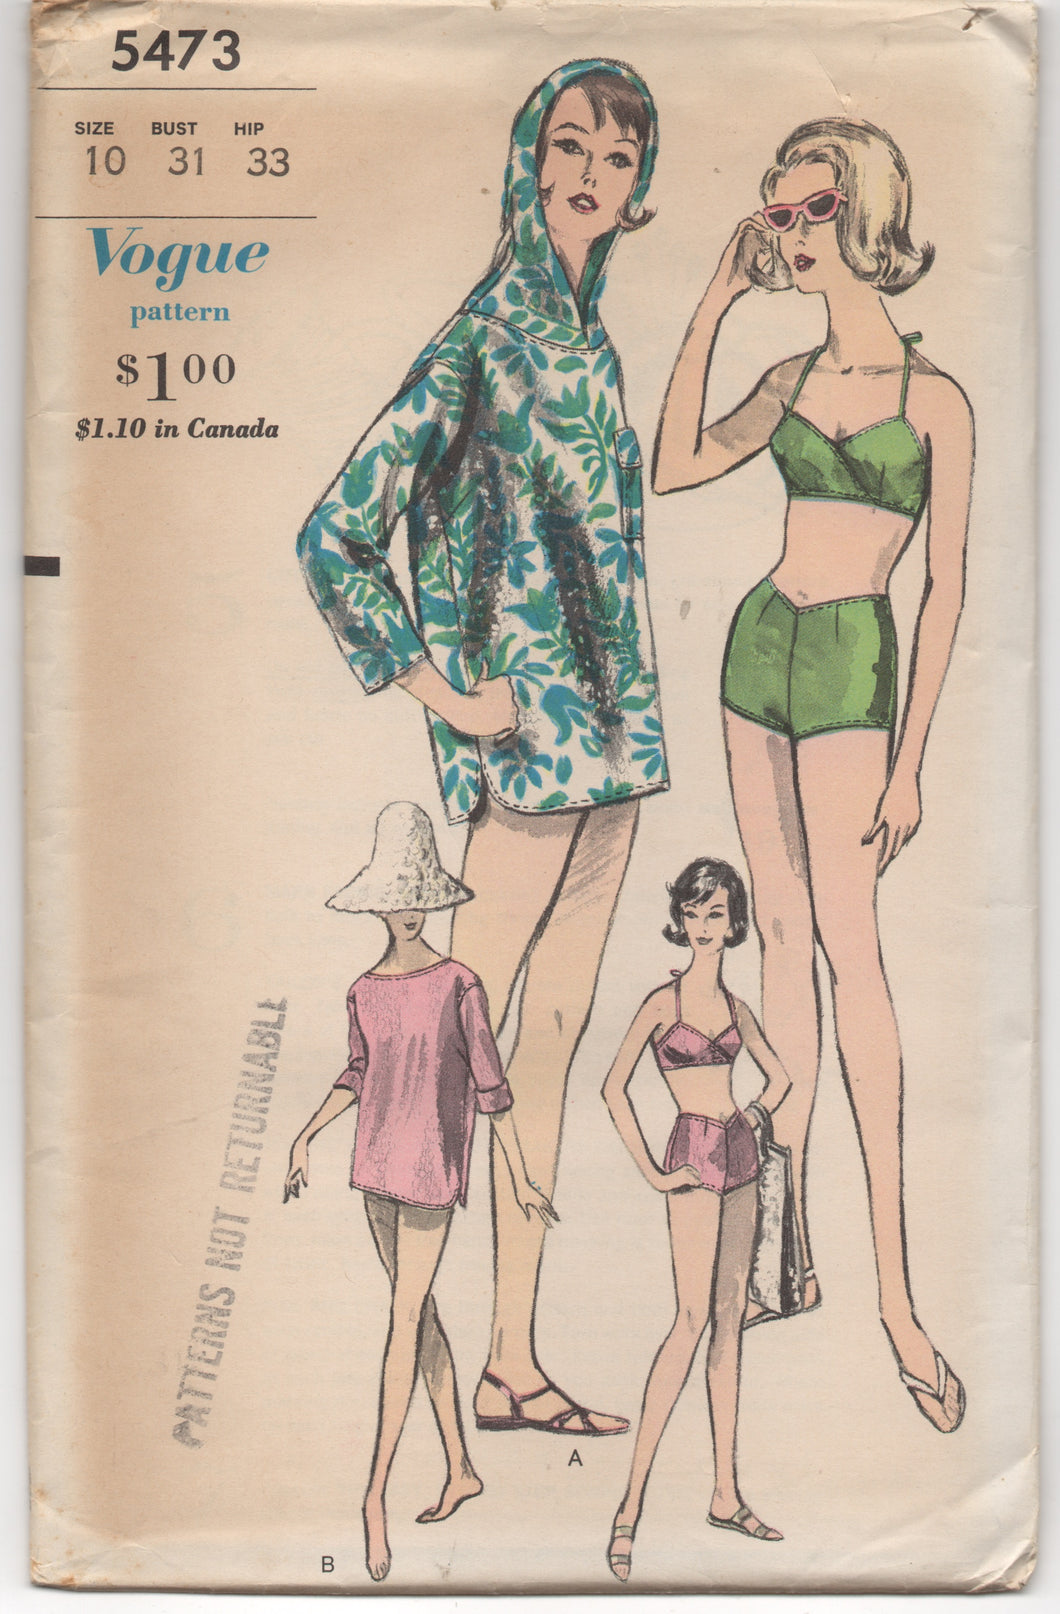 1960's Vogue Two Piece Bathing Suit, and Hooded Cover Up - Bust 31